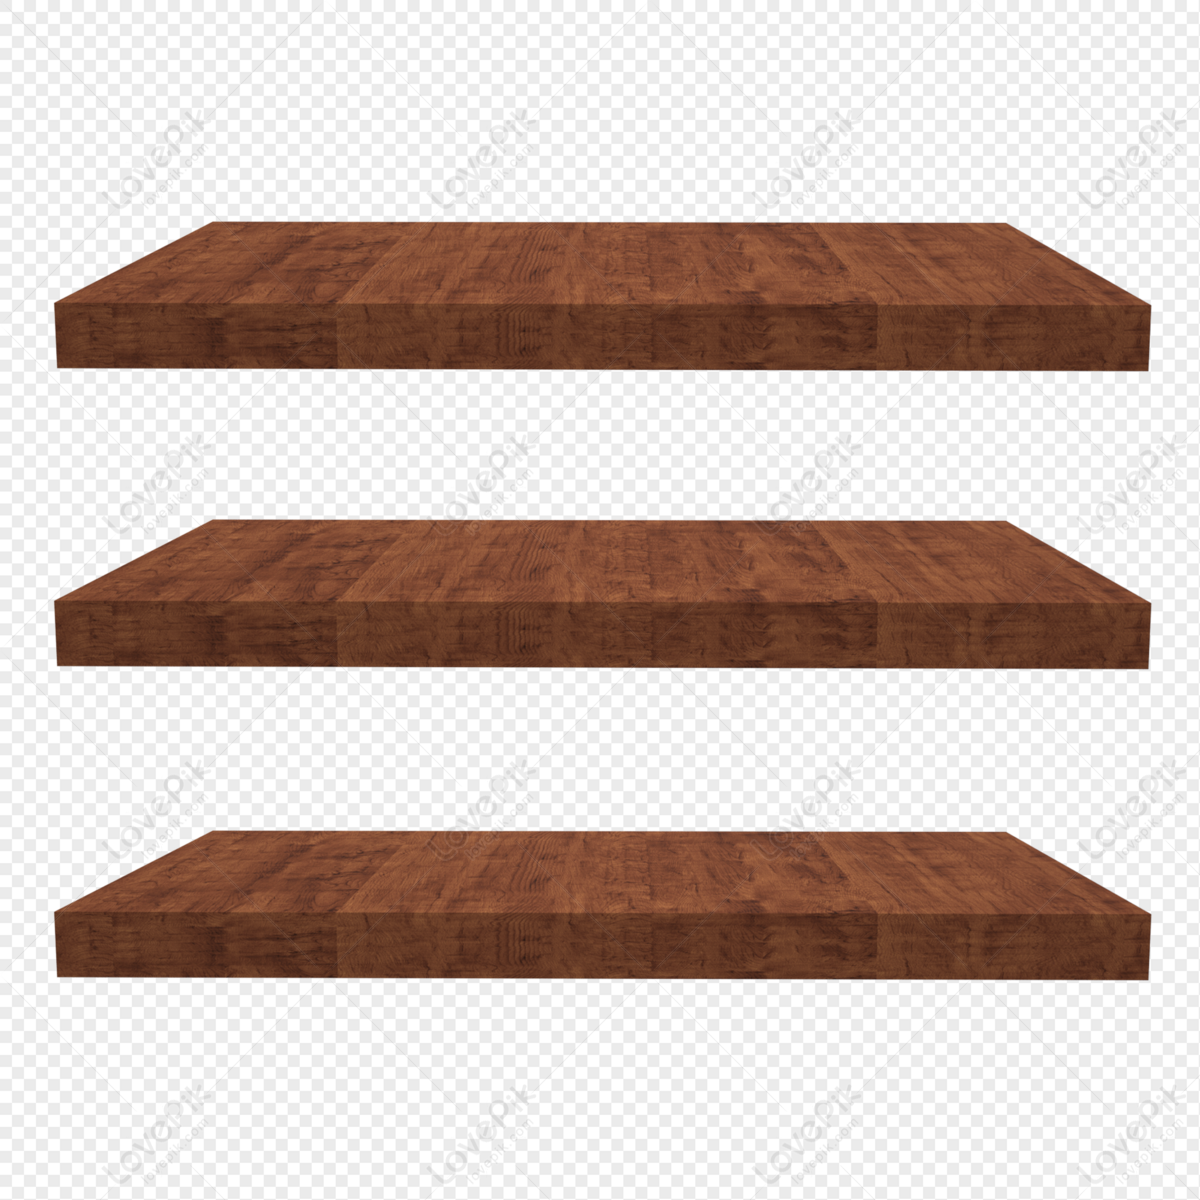 Wooden stand PNG Images & PSDs for Download